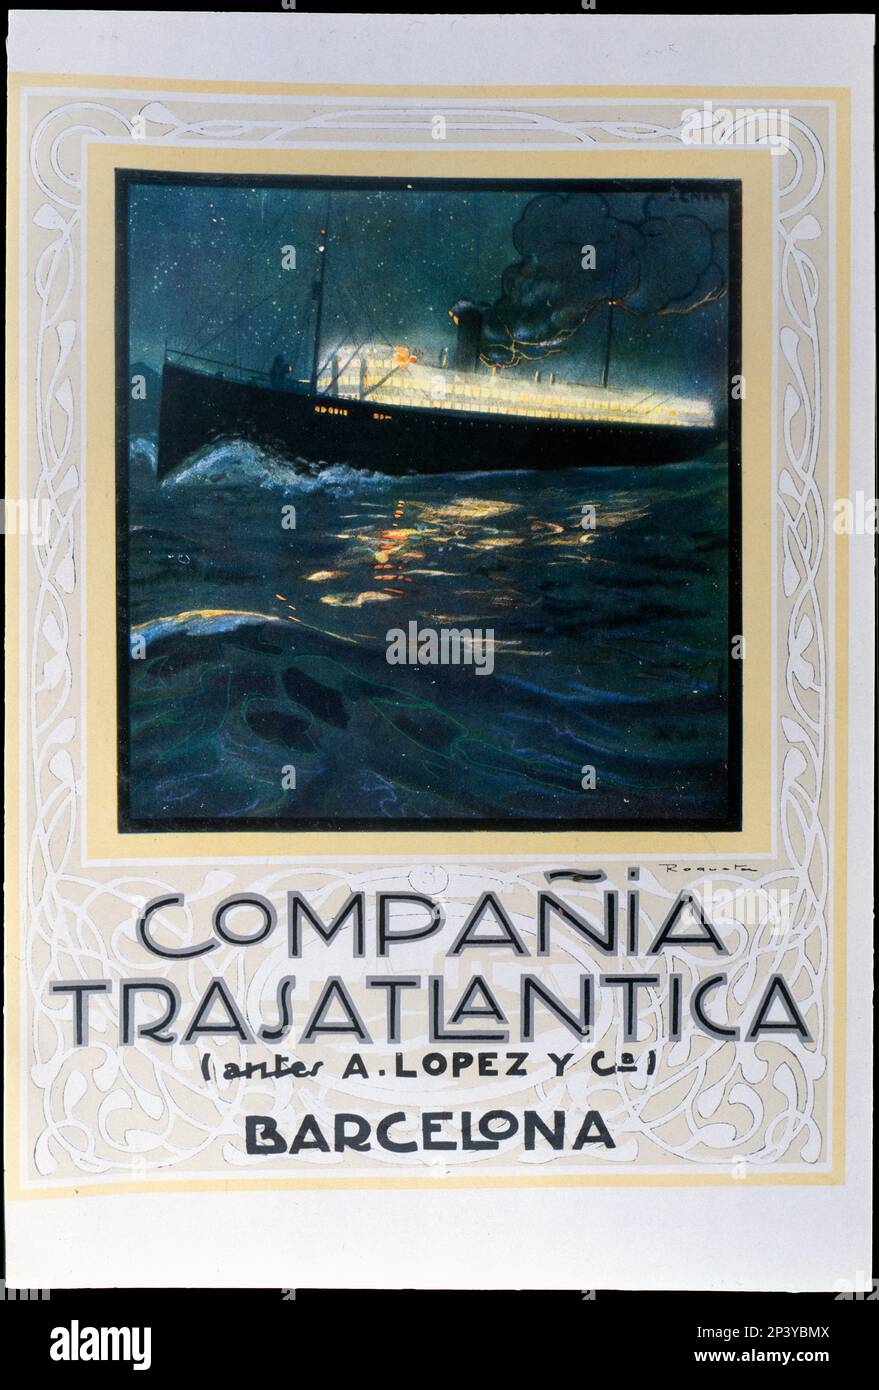 Advertising of the Cia, 1921. Trasatl&#xe1;ntica of maritime transport, founded in 1856 by Antonio L&#xf3;pez y L&#xf3;pez, first Marquis of Comillas. Stock Photo